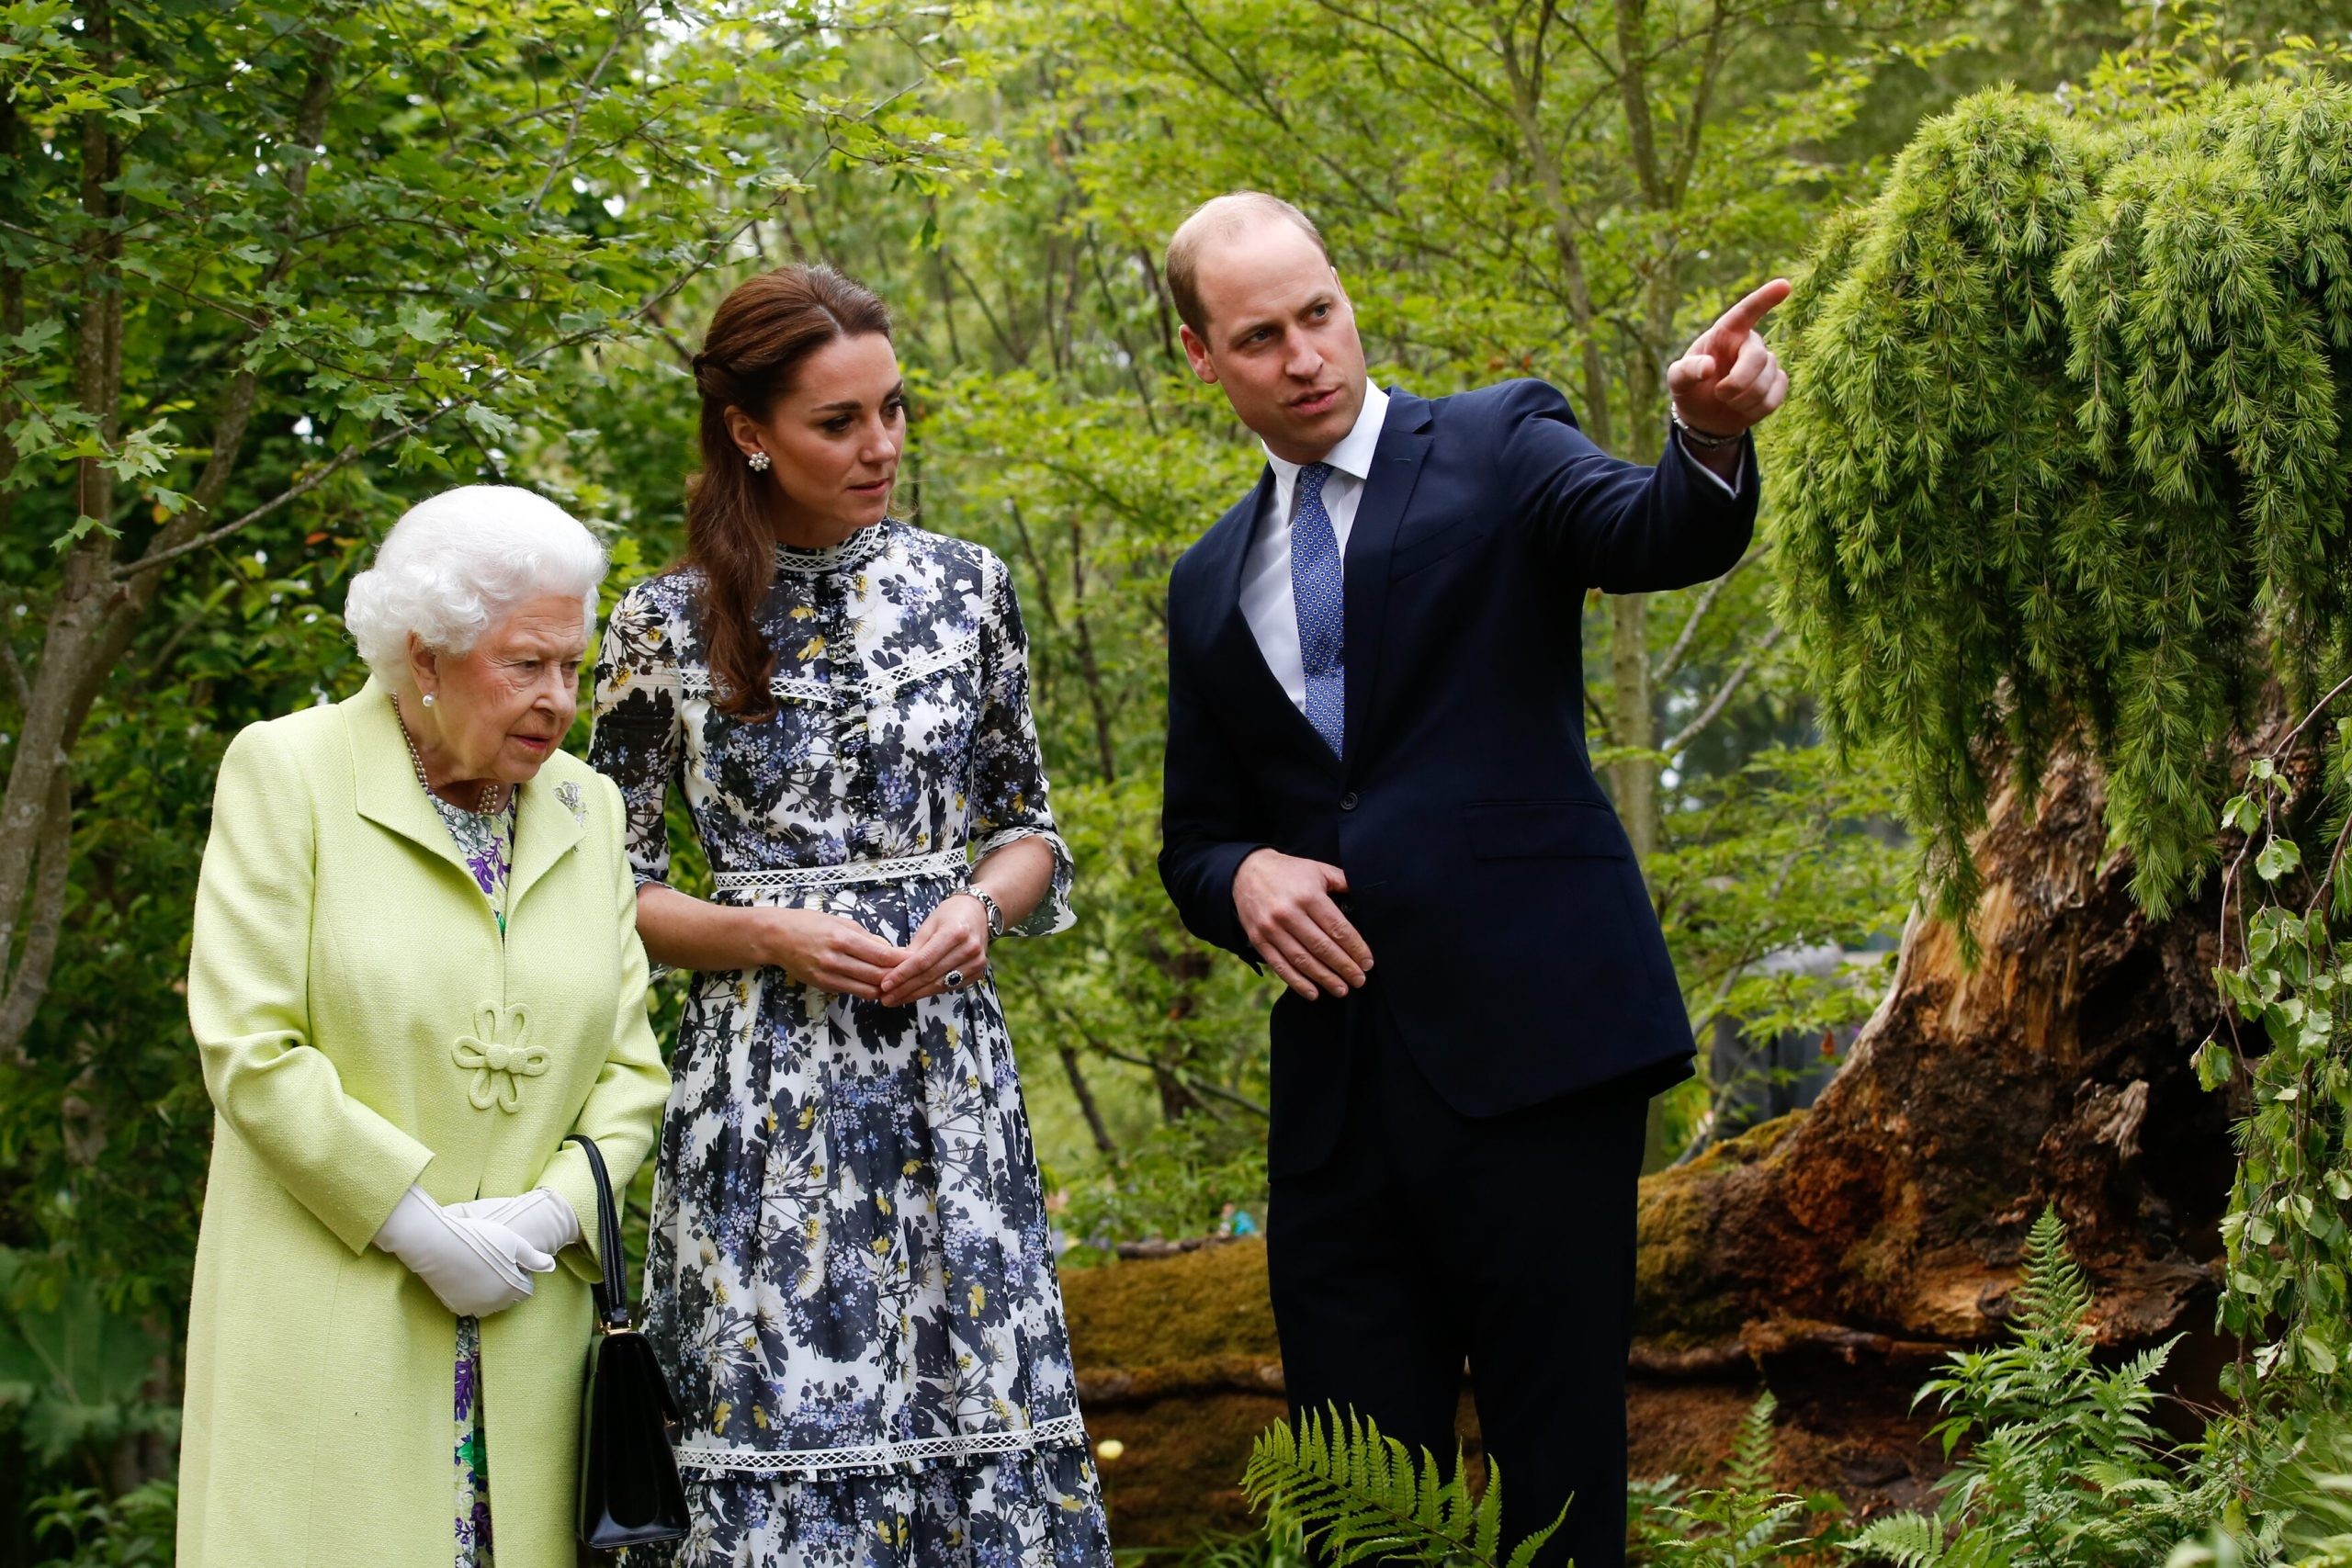 2019: Queen Elizabeth and William, the Duke of Cambridge are given a tour by Catherine, the Duchess of Cambridge, of her RHS Back to Nature Garden, which she designed with landscape architects Andree Davies and Adam White of Davies White Landscape Architects at the RHS Chelsea Flower Show